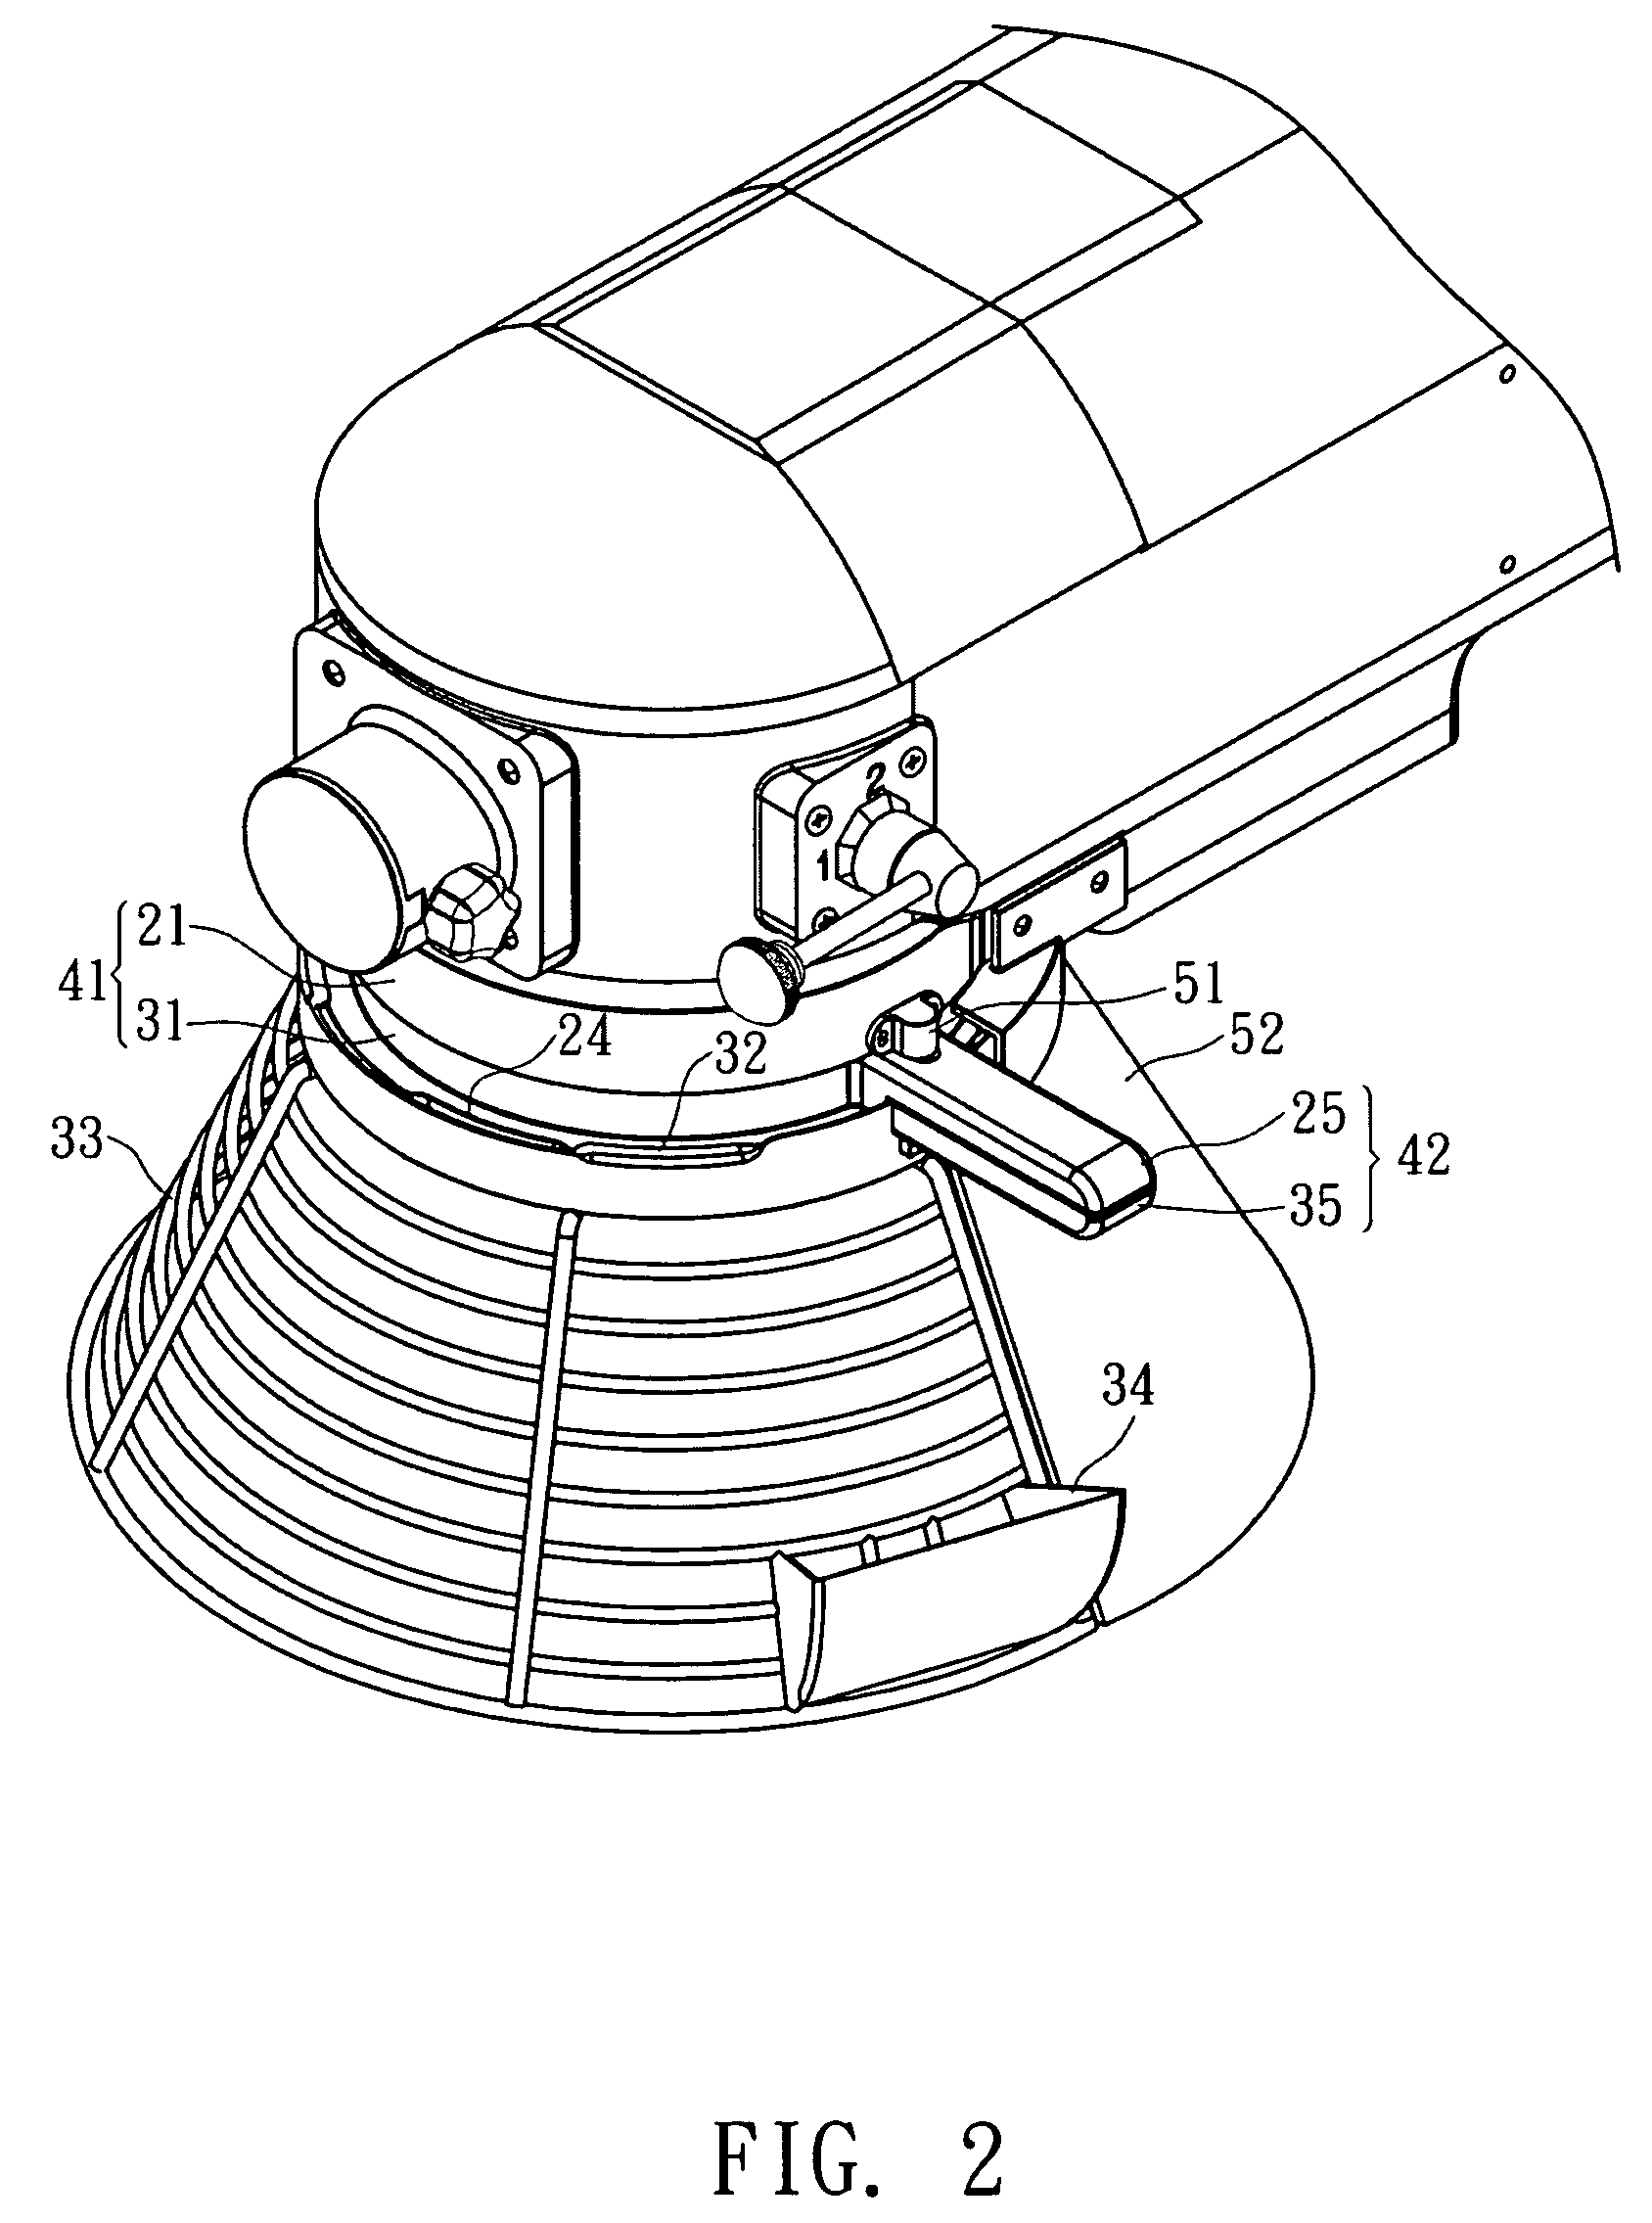 Covering structure of a mixer